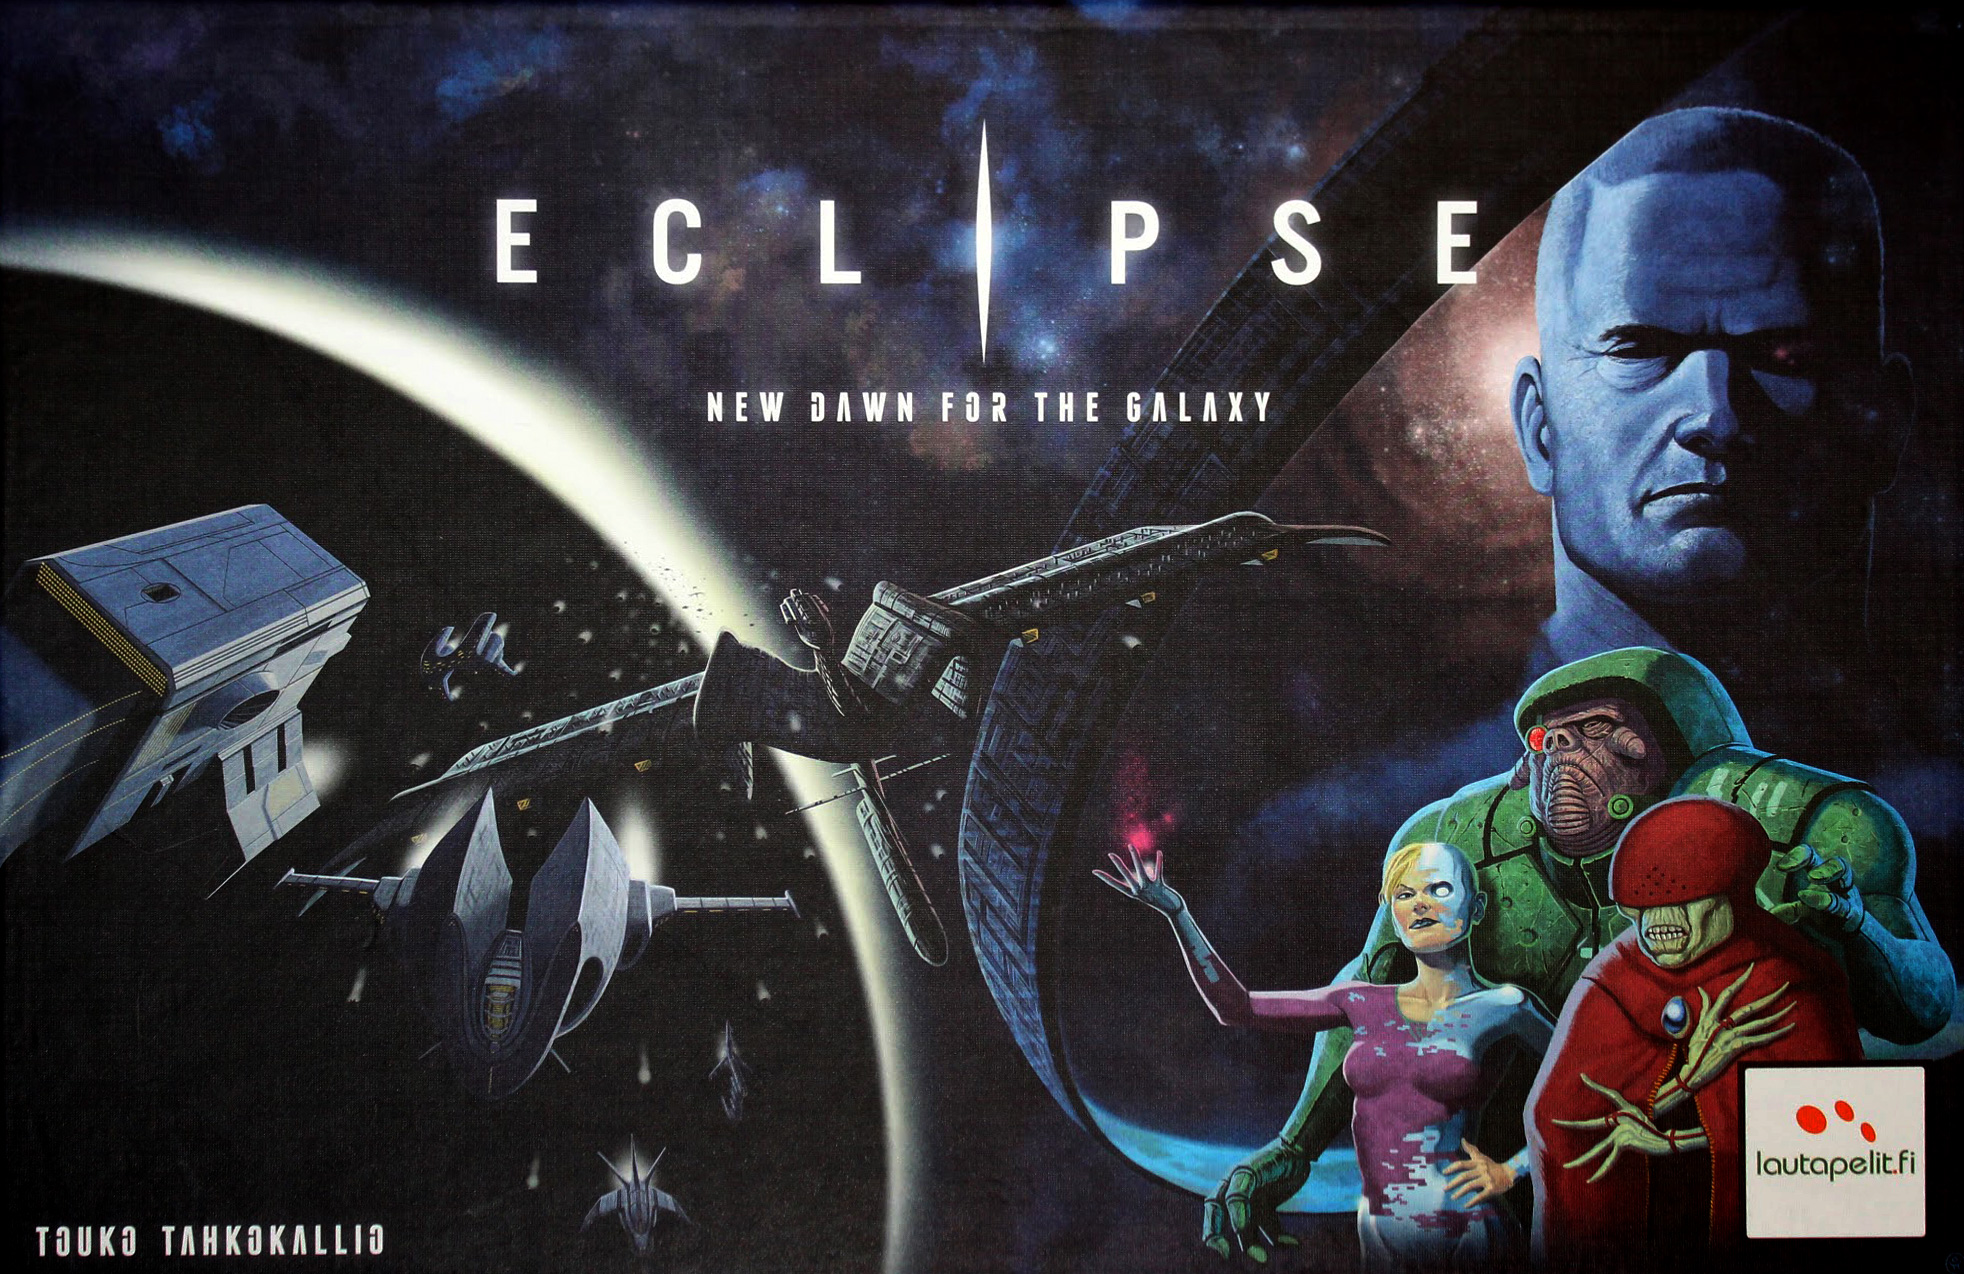 “Eclipse: New Dawn for the Galaxy” Getting Mac/PC Release - Currently on Steam Greenlight